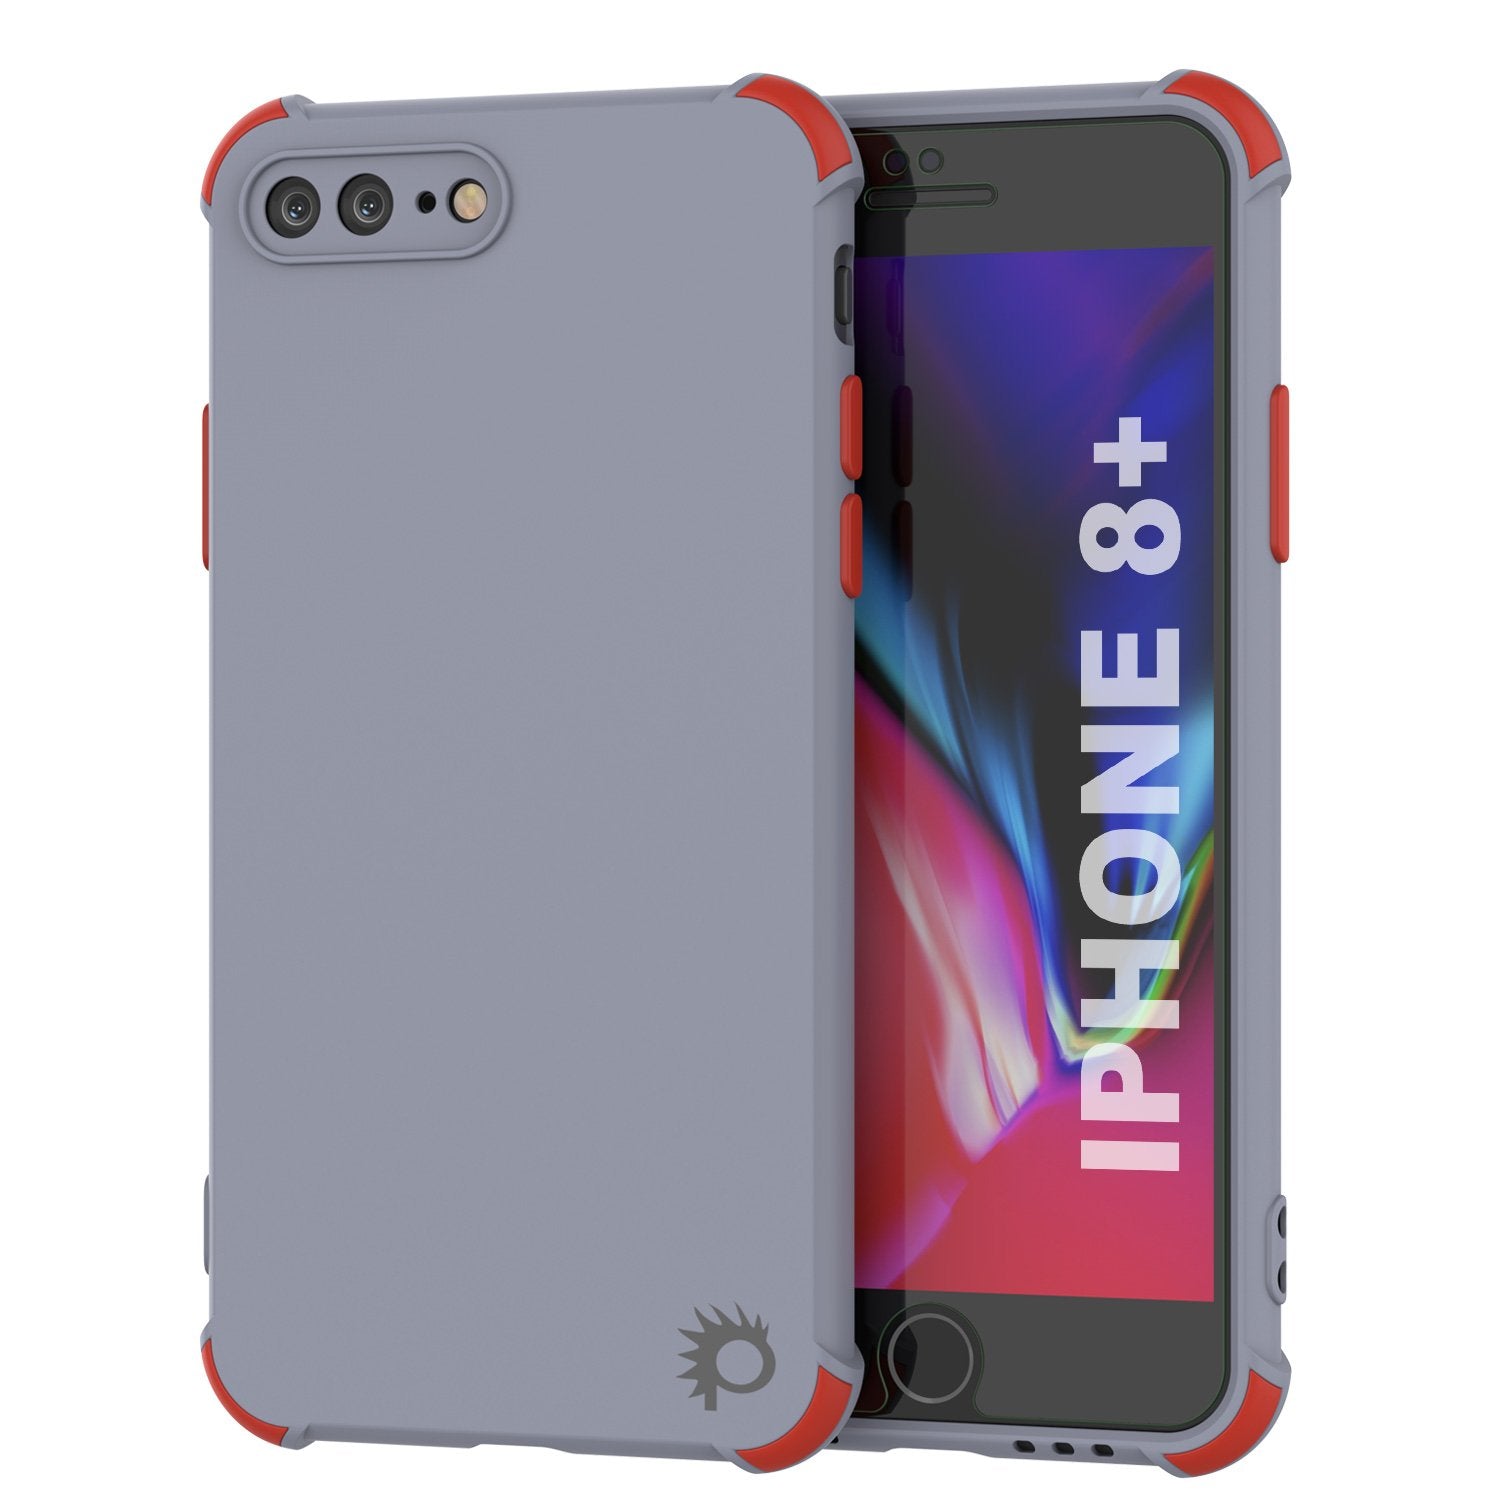 Punkcase Protective & Lightweight TPU Case [Sunshine Series] for iPhone 8+ Plus [Grey]